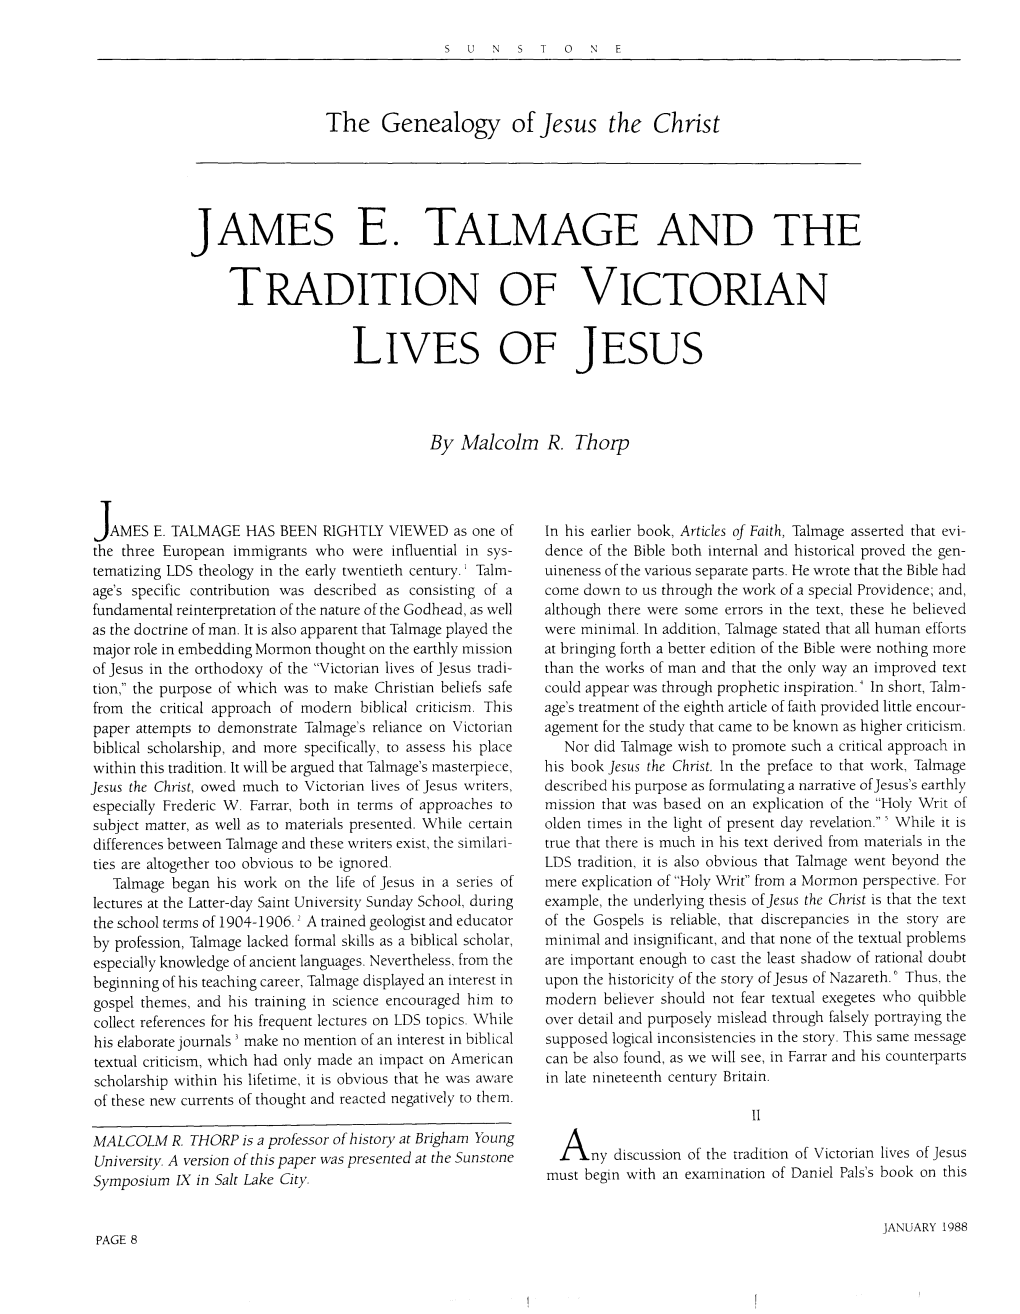 James E. Talmage and the Tradition of Victorian Lives of Jesus